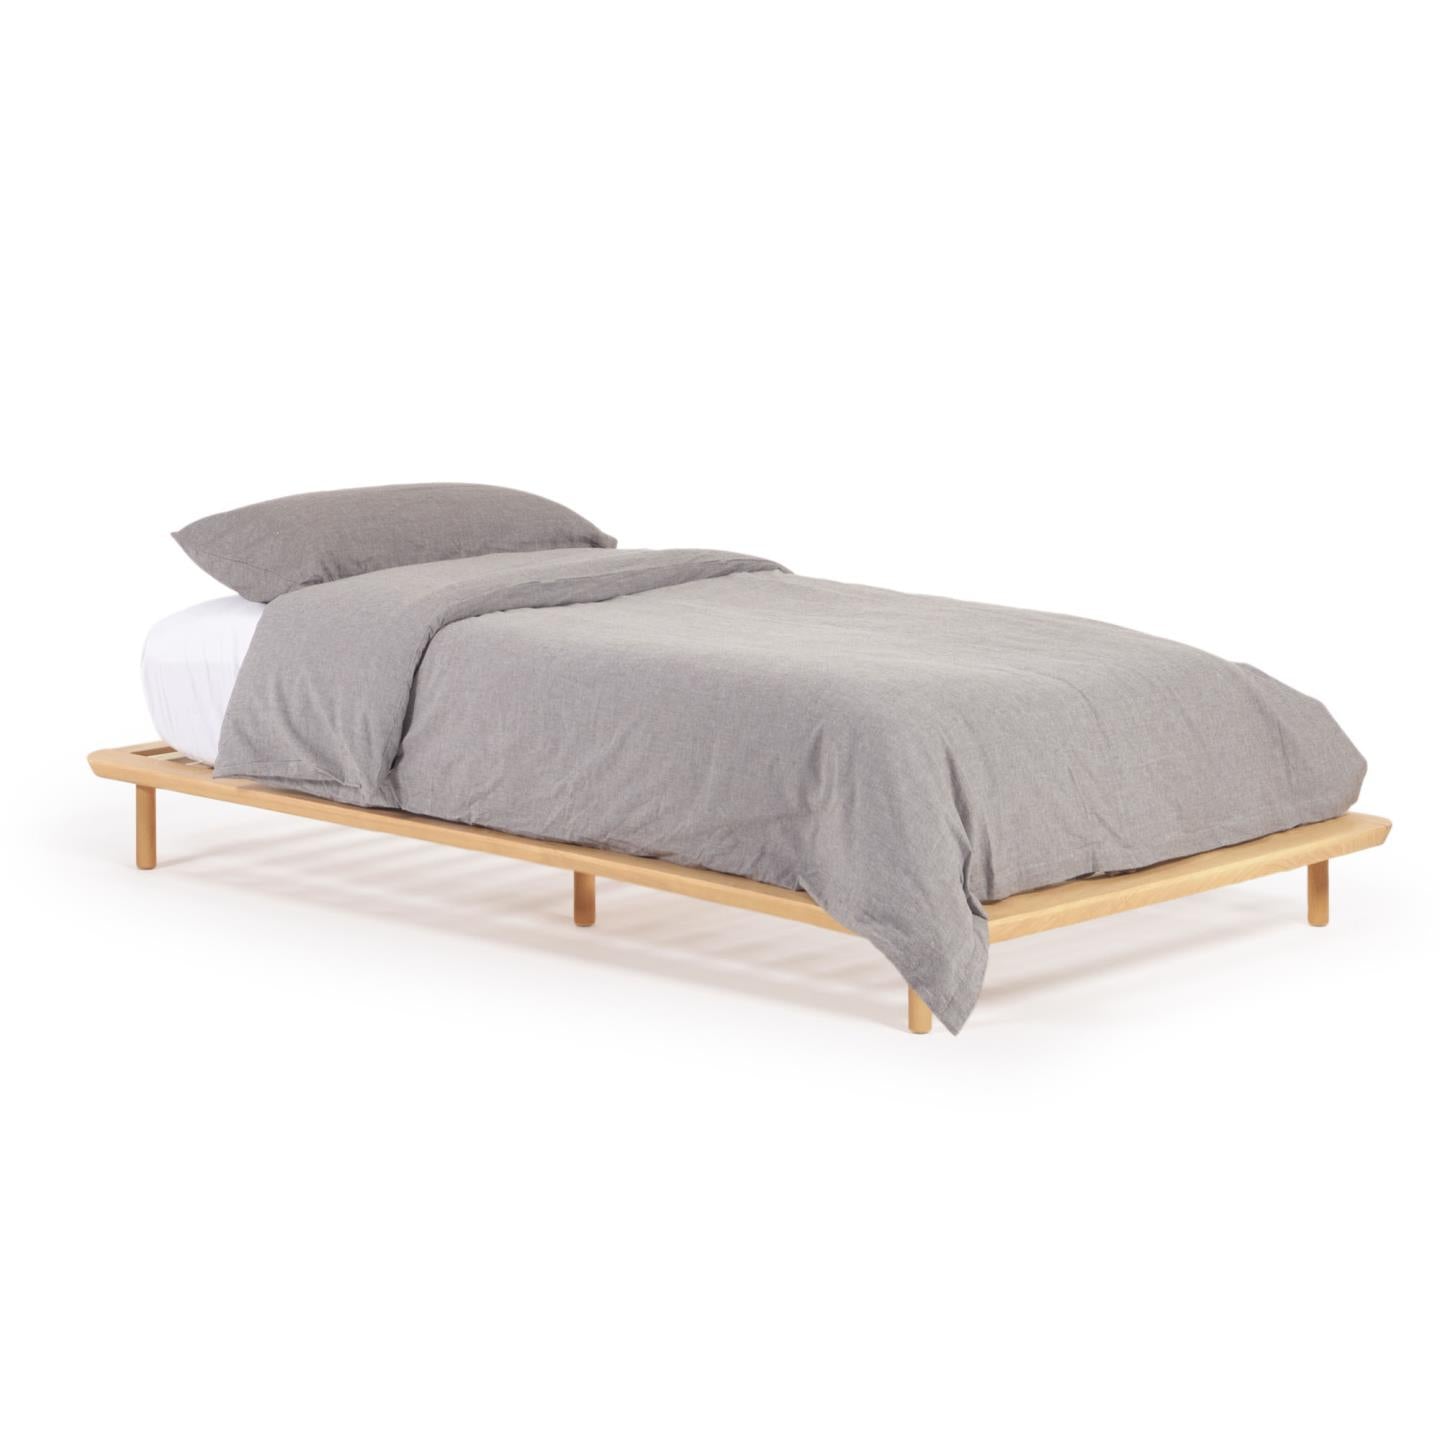 Anielle bed made from solid ash wood for a 90 x 200 cm mattress